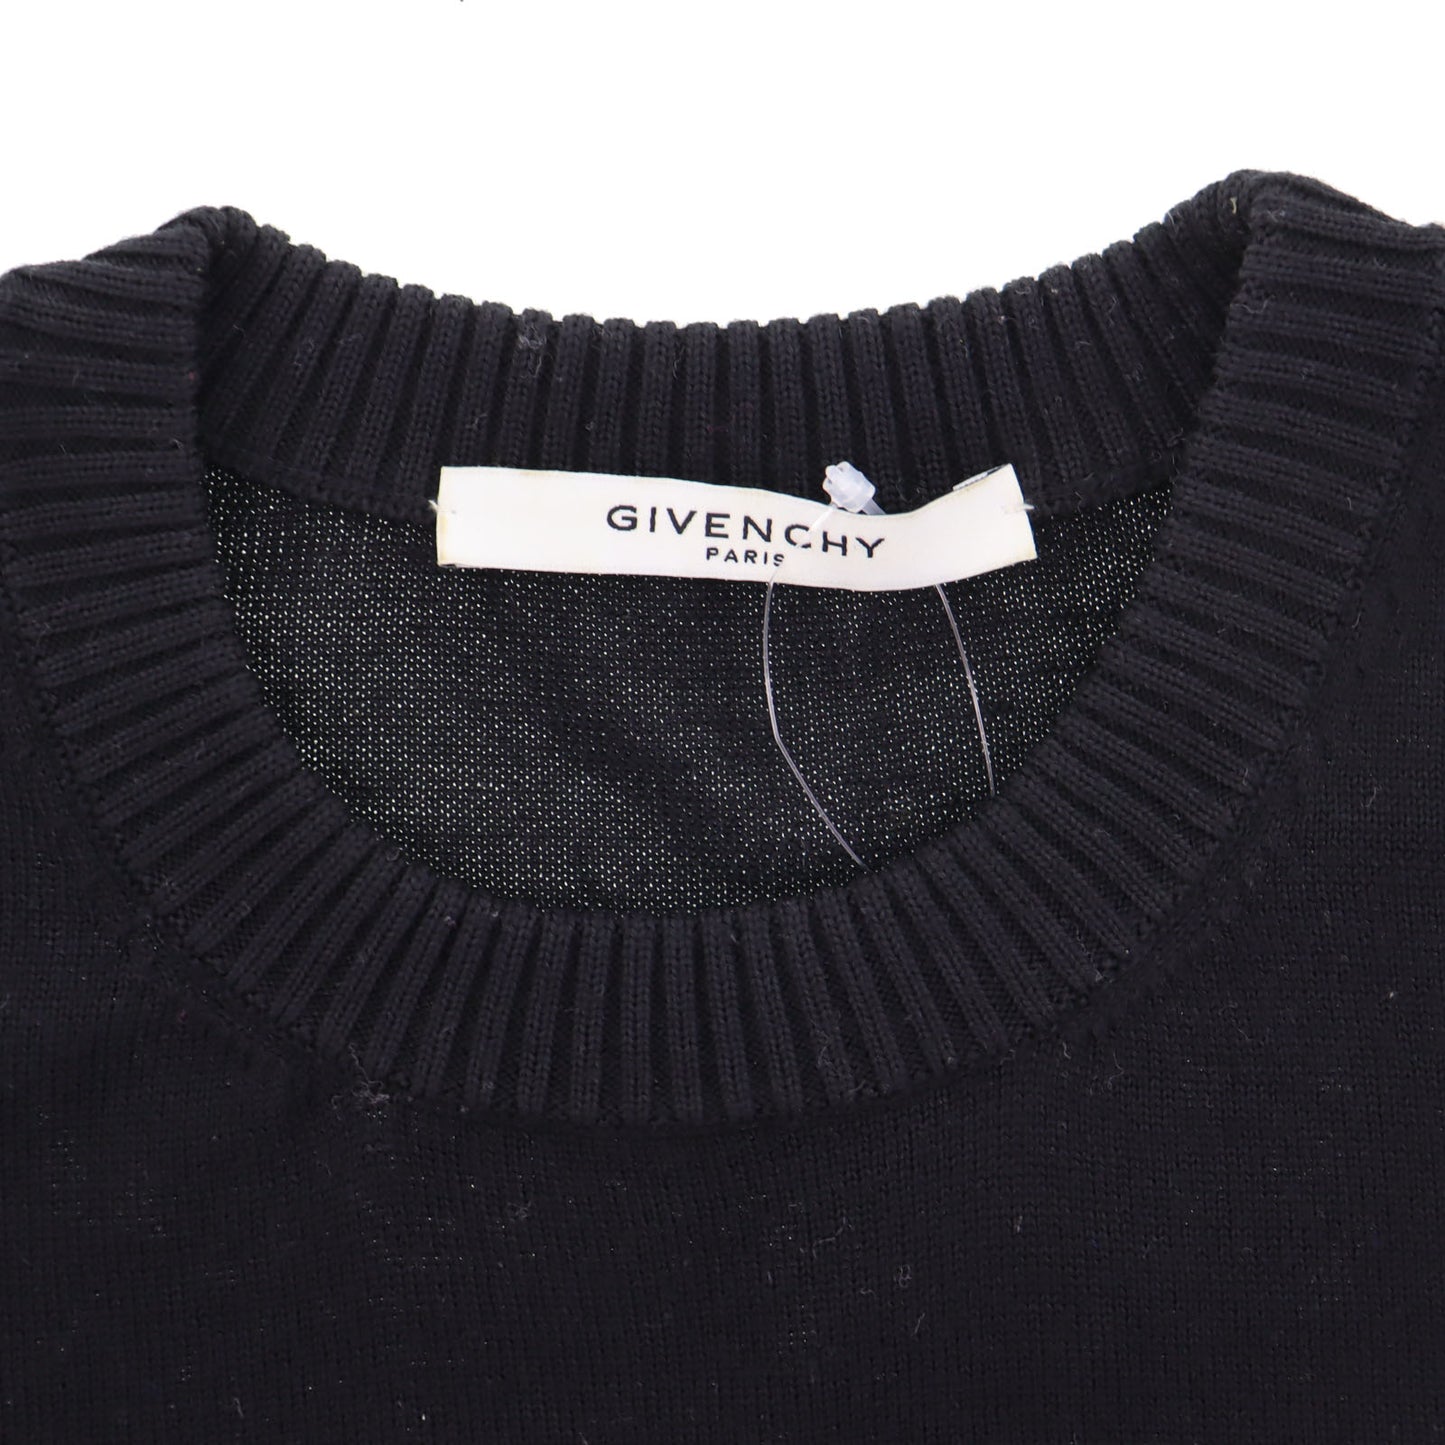 GIVENCHY Long Sleeve Knit Sweater Tops Italy Black 100% Wool #AH527